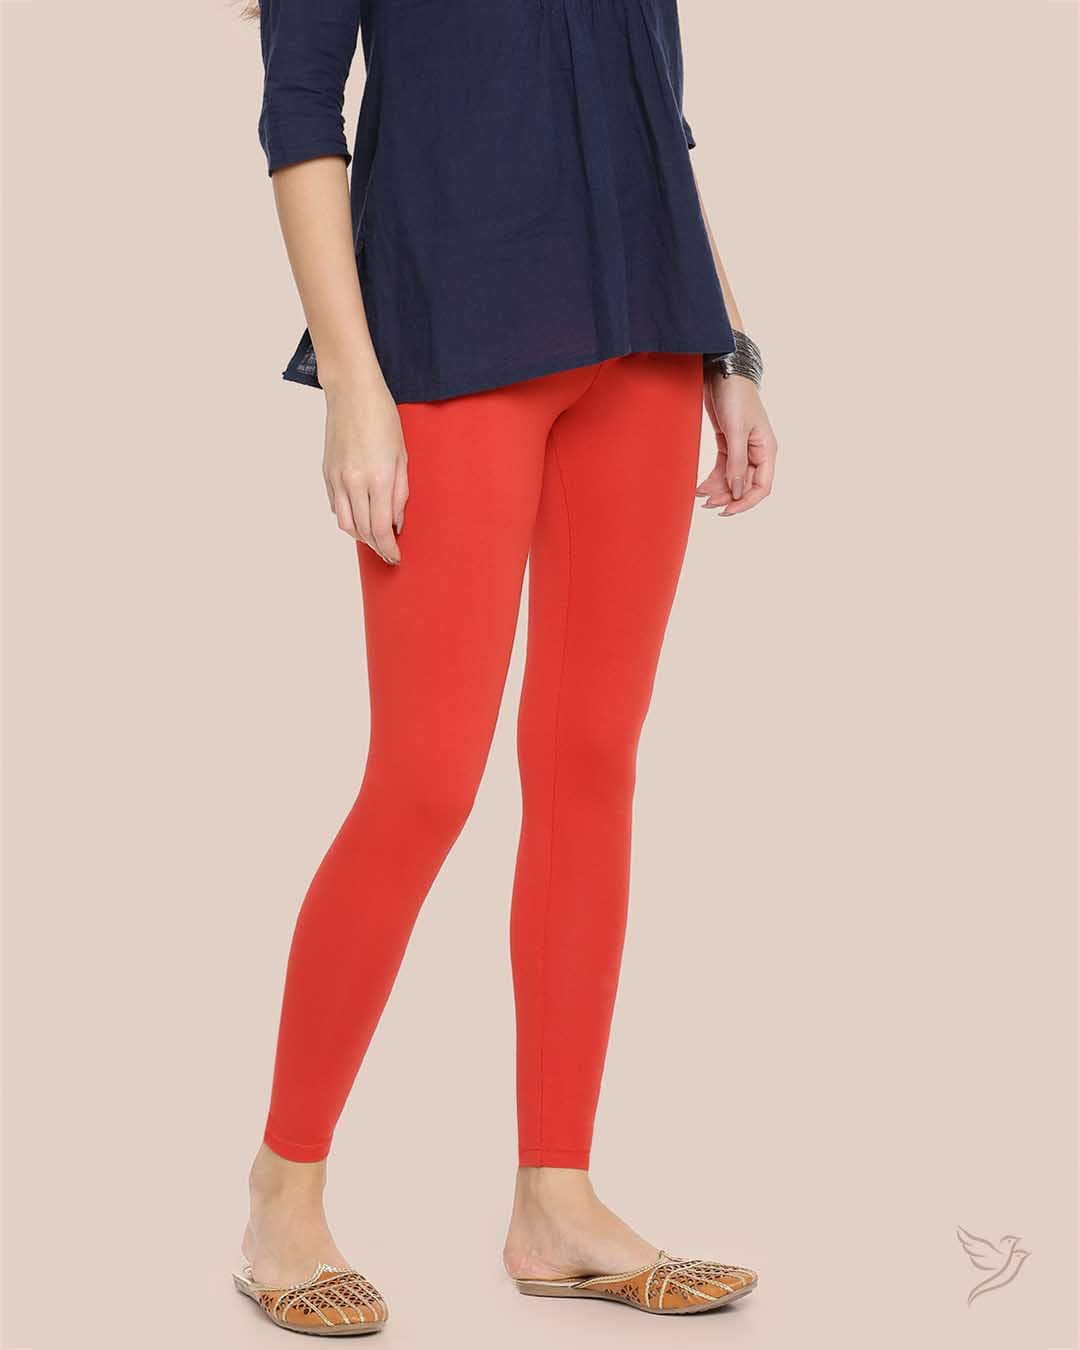 Coral Flame Cotton Ankle Legging for Women